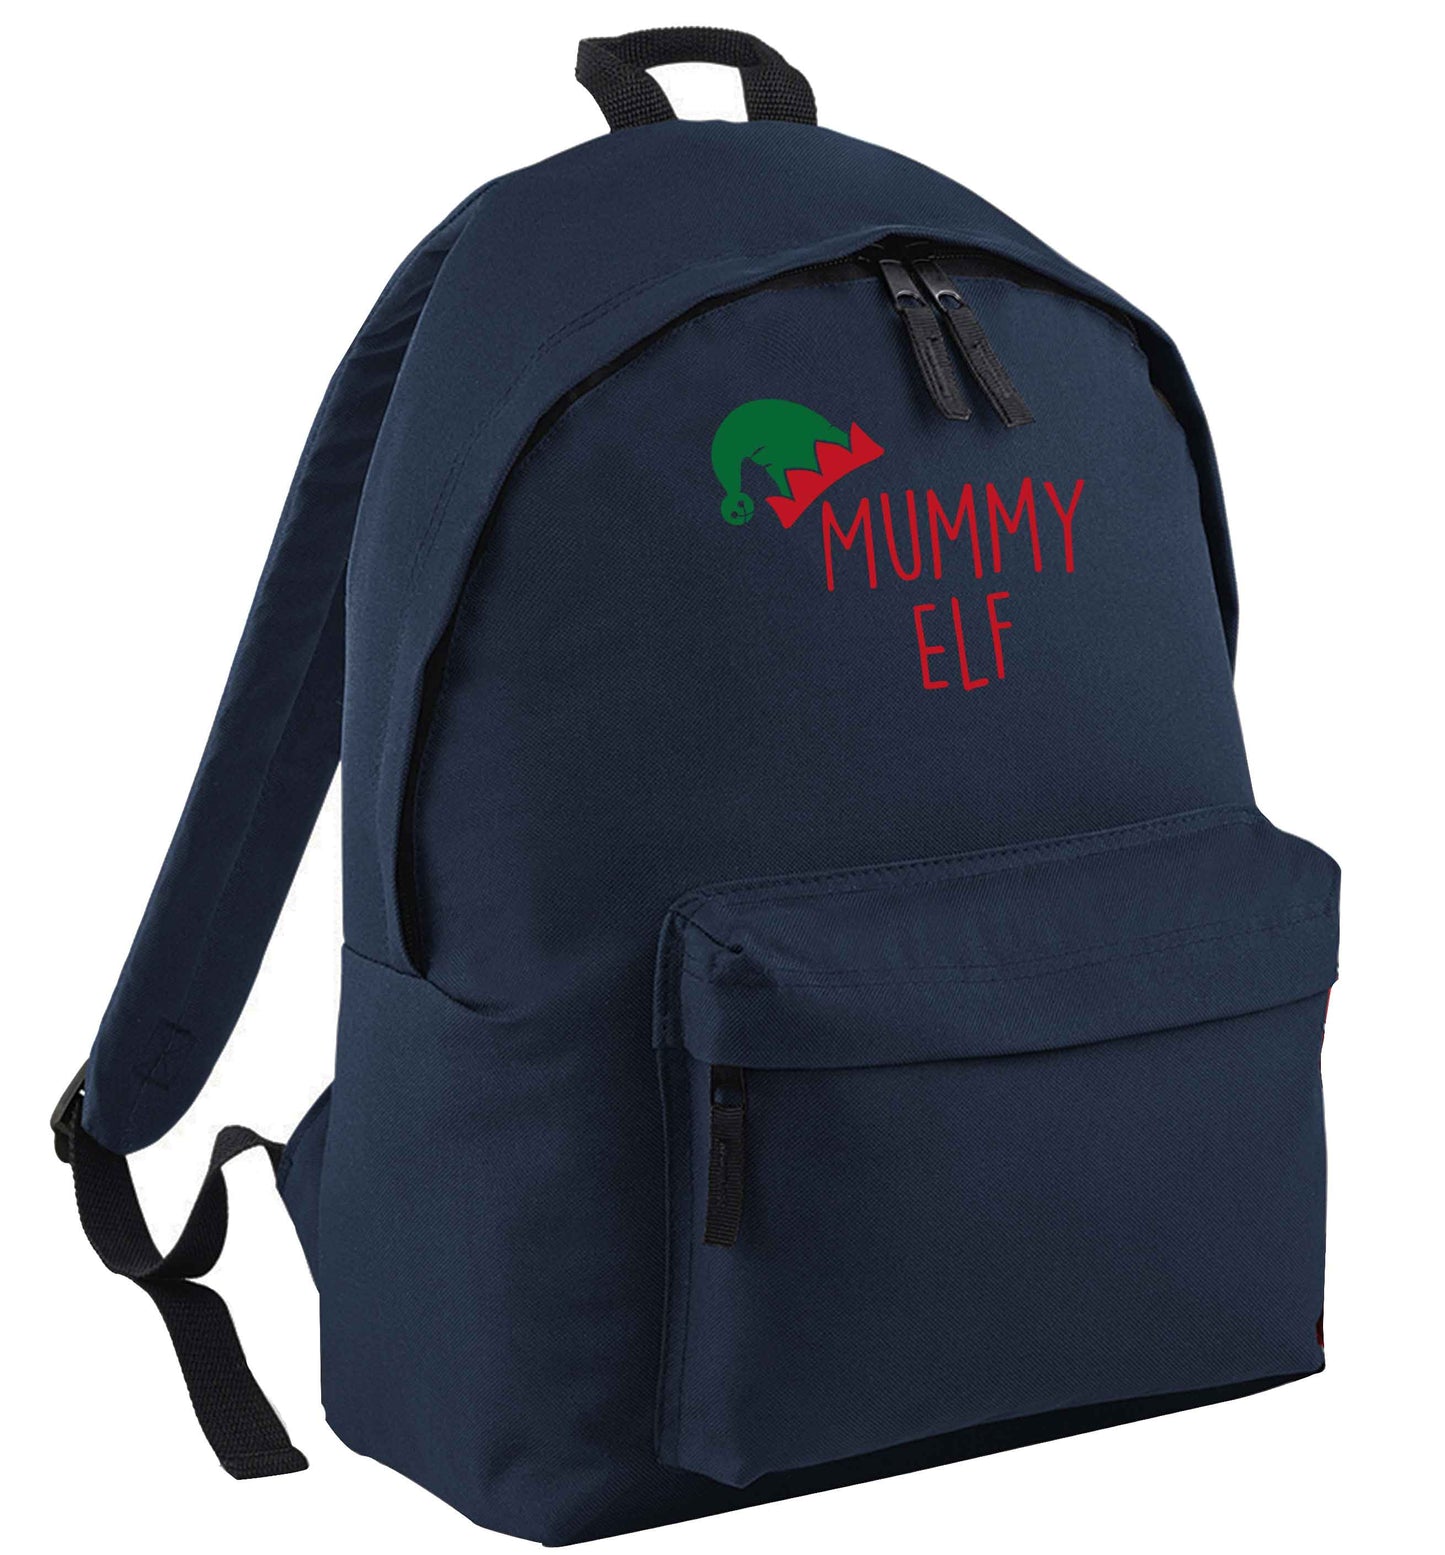 Mummy elf navy adults backpack